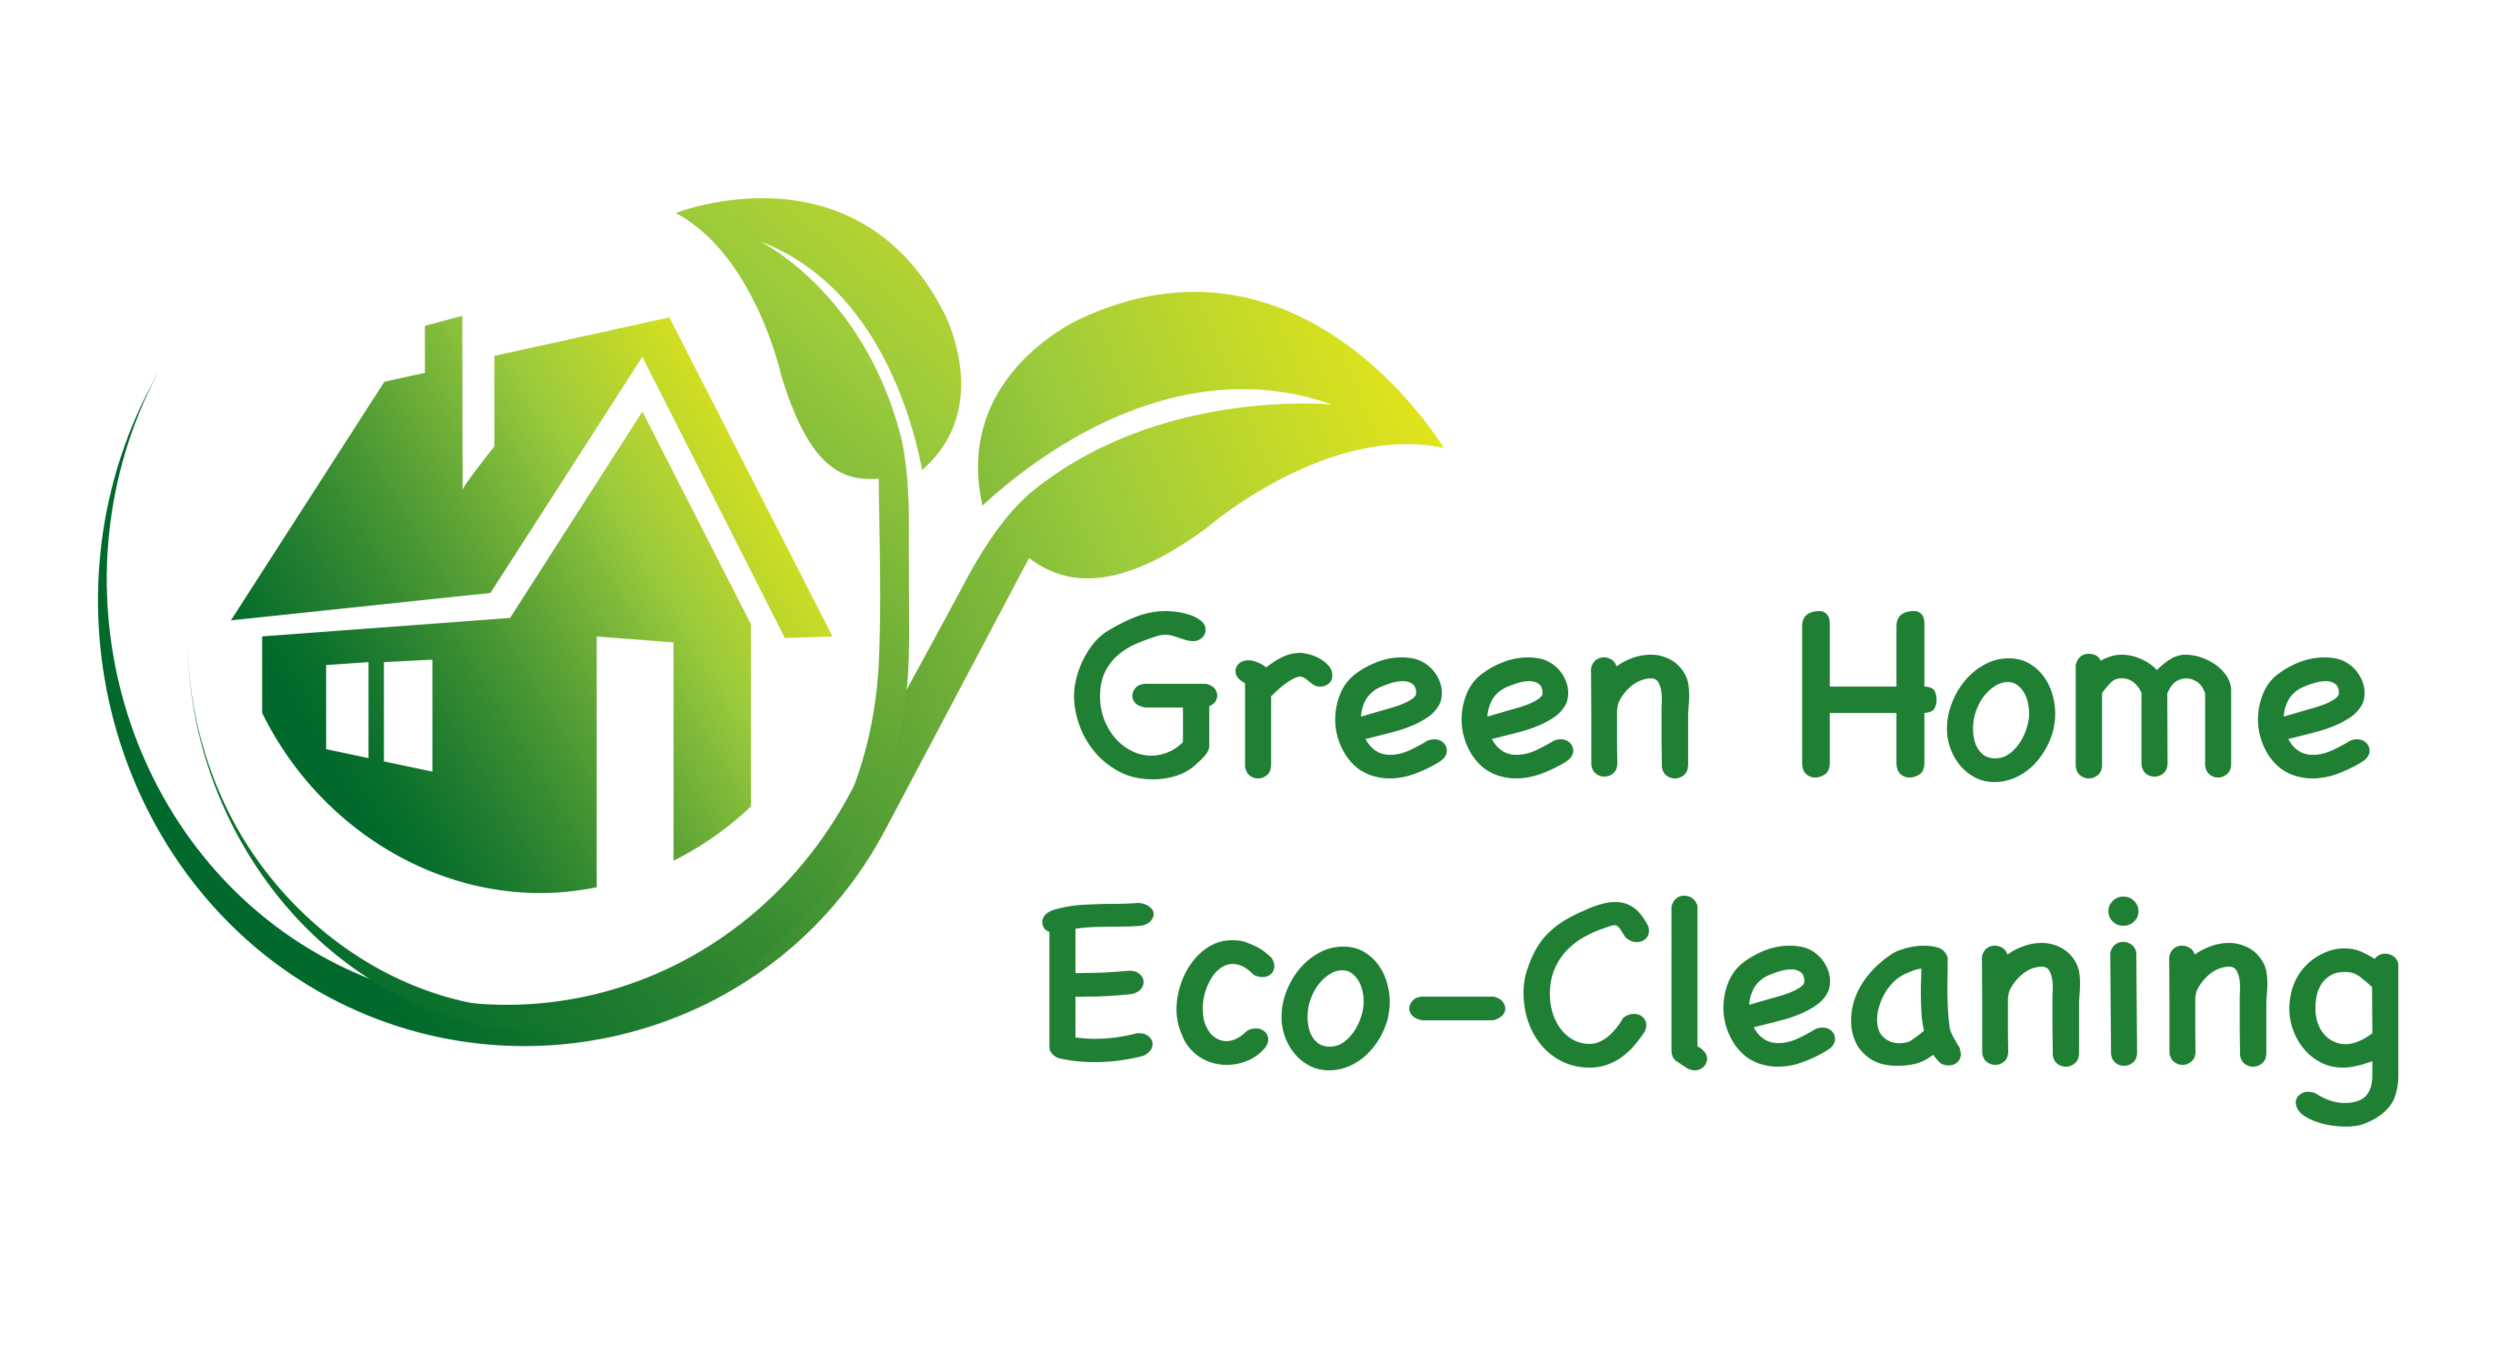 Green Home Eco Cleaning